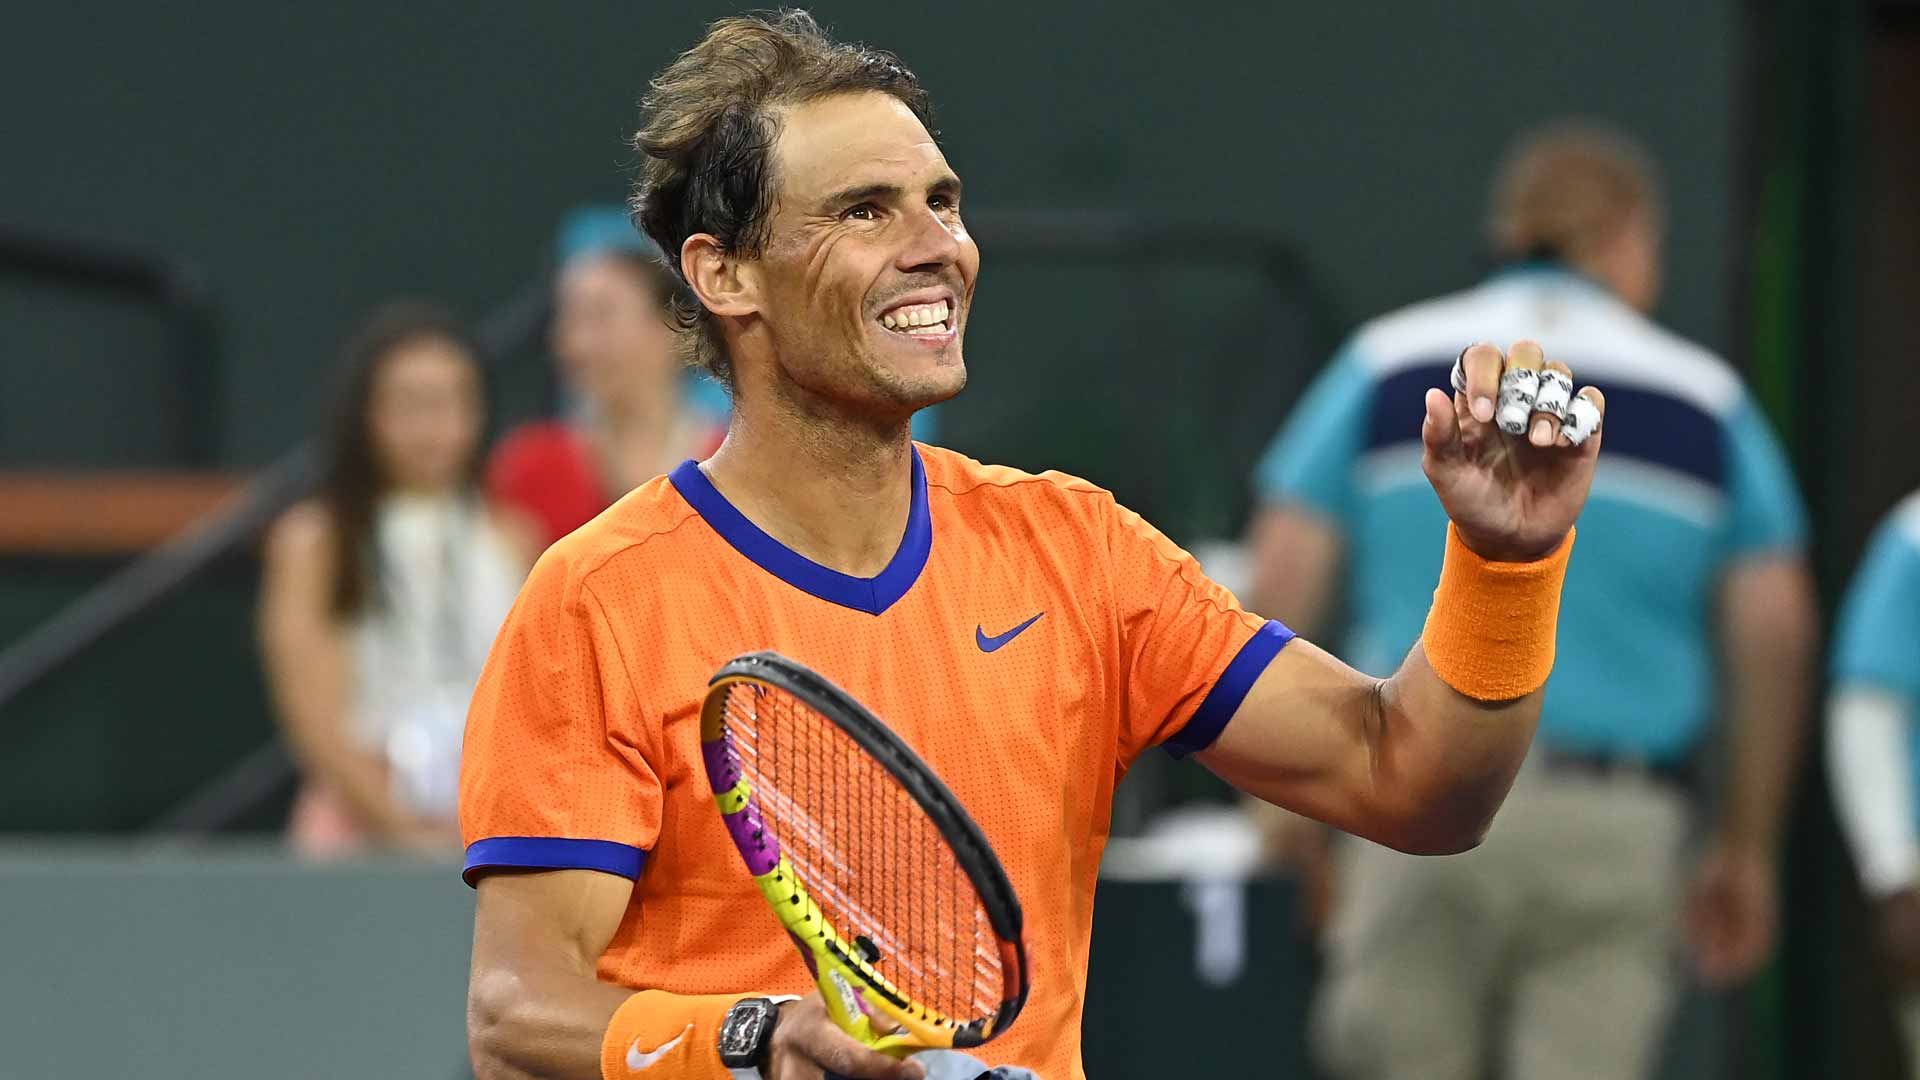 Rafael Nadal owns a 59-11 record at Indian Wells.